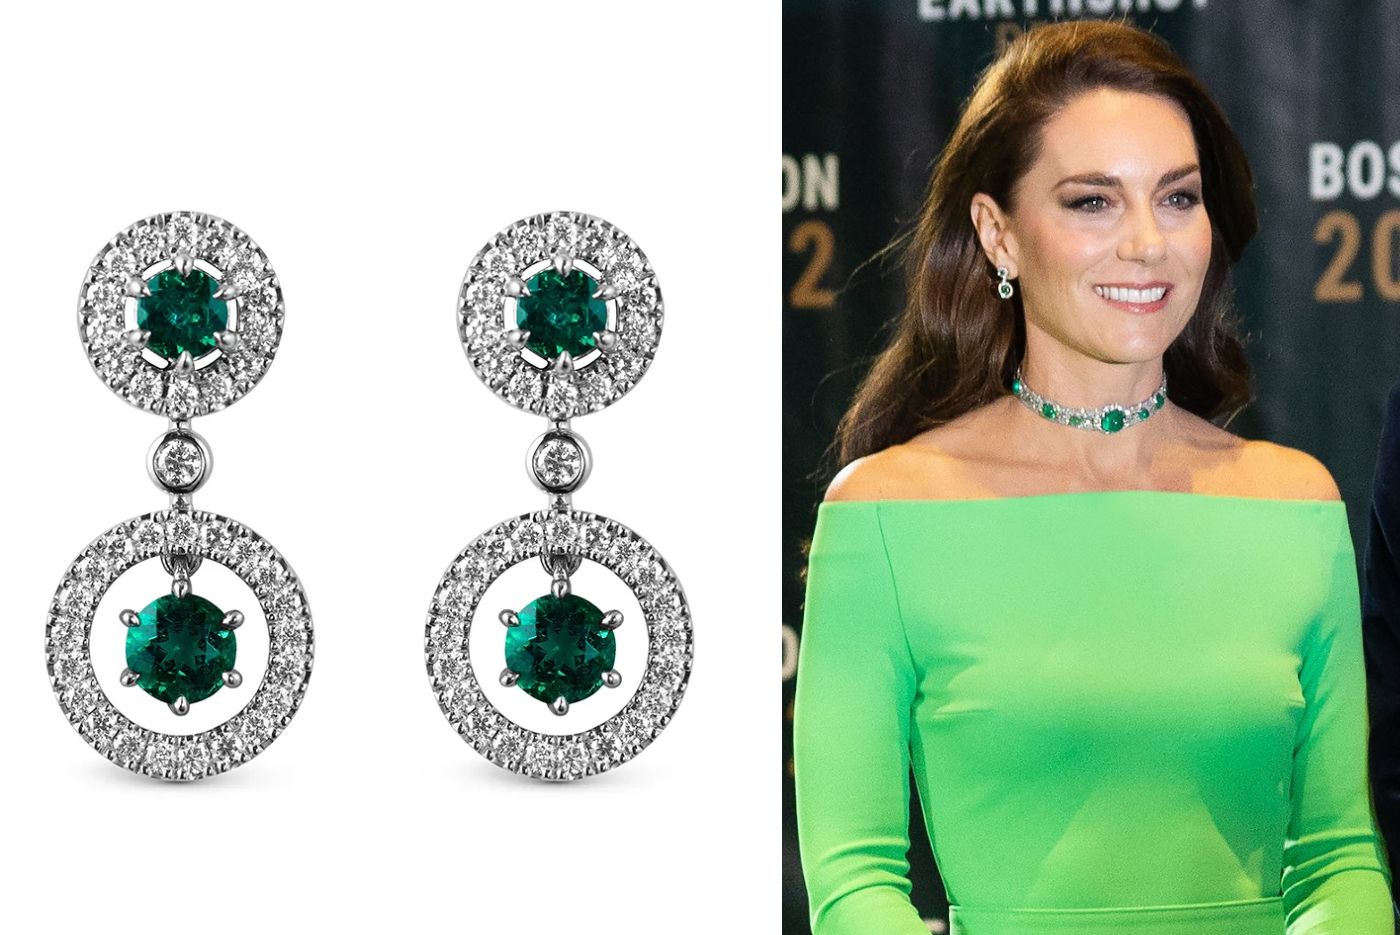 The Princess of Wales Catherine wore Asprey London Emerald and Diamond Halo Earrings in December 2022 at the Eartshot Prize evening